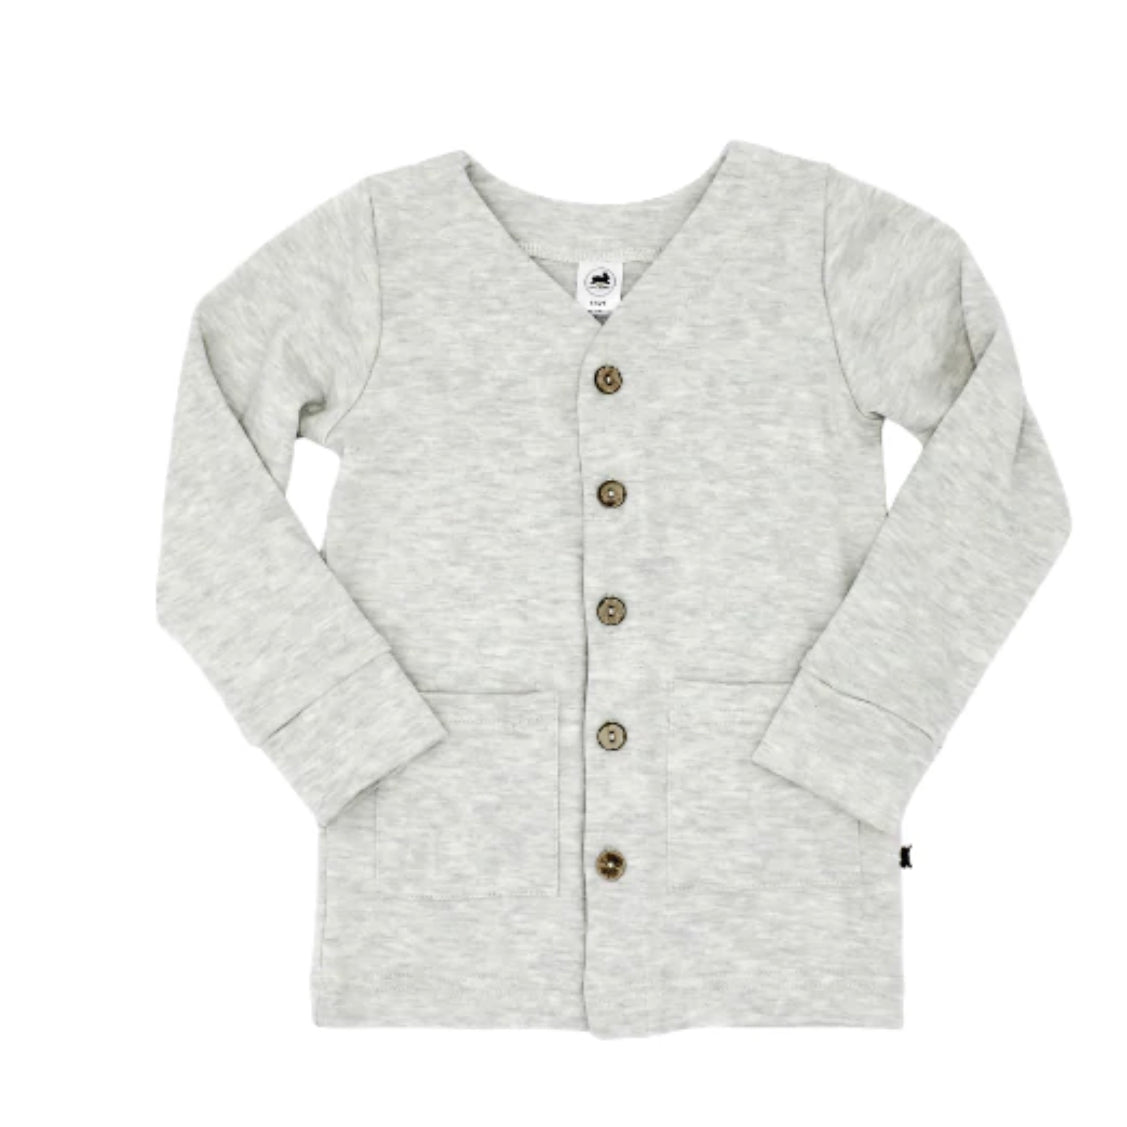 Little & Lively | BABY/KID'S BAMBOO/COTTON CARDIGAN | ASH